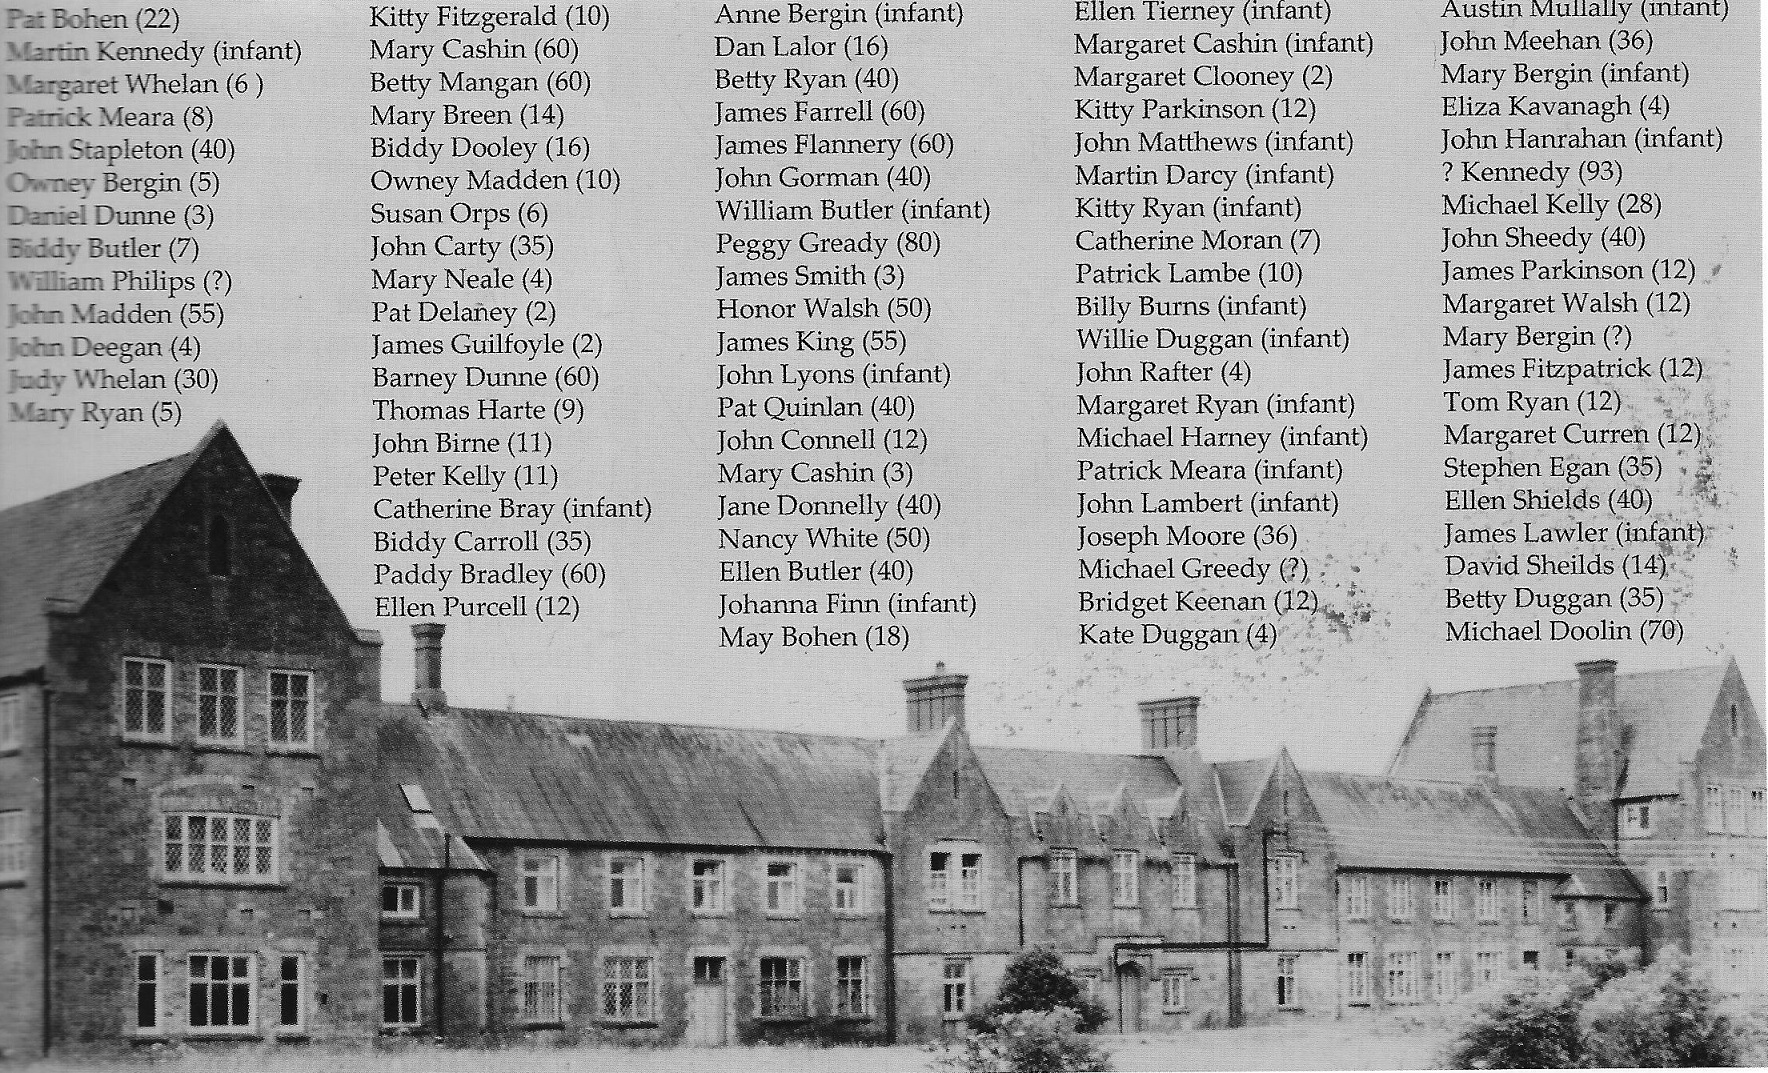 names and ages of inmates who died in the Roscrea workhouse in 1848